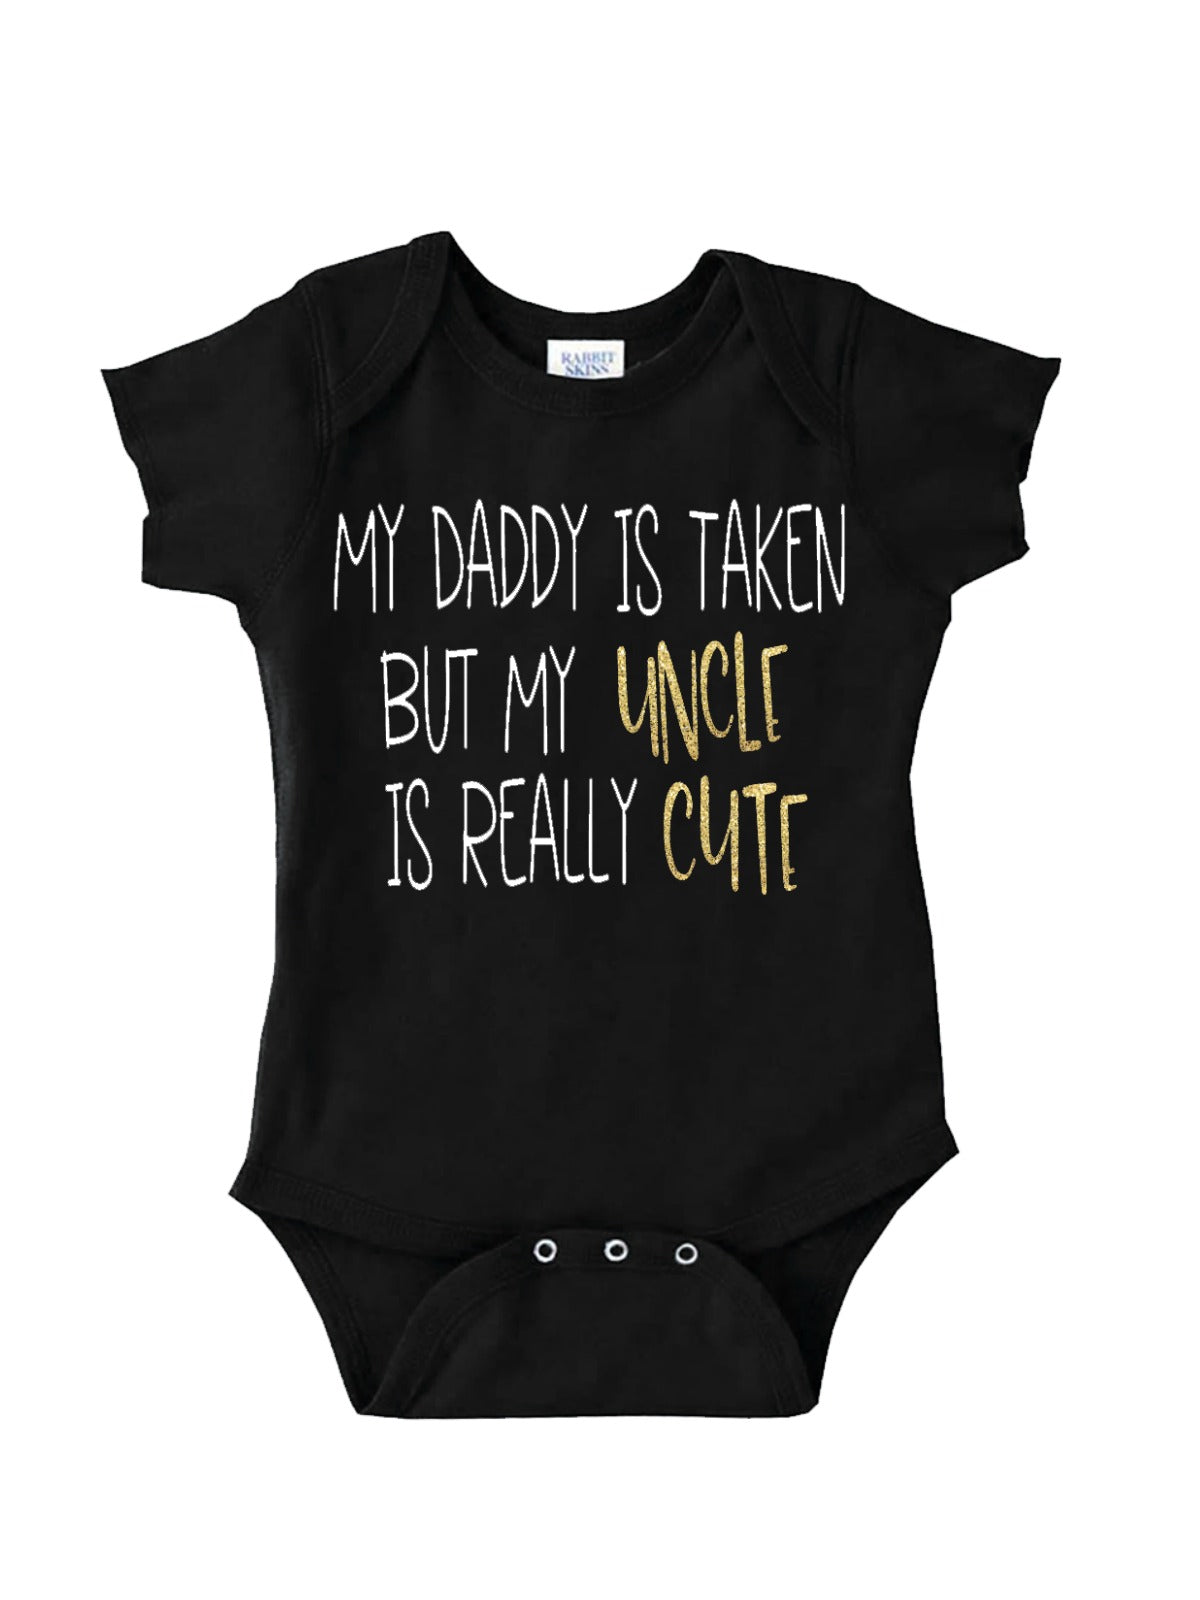 My Daddy Is Taken But My Uncle Is Really Cute Bodysuit - Black